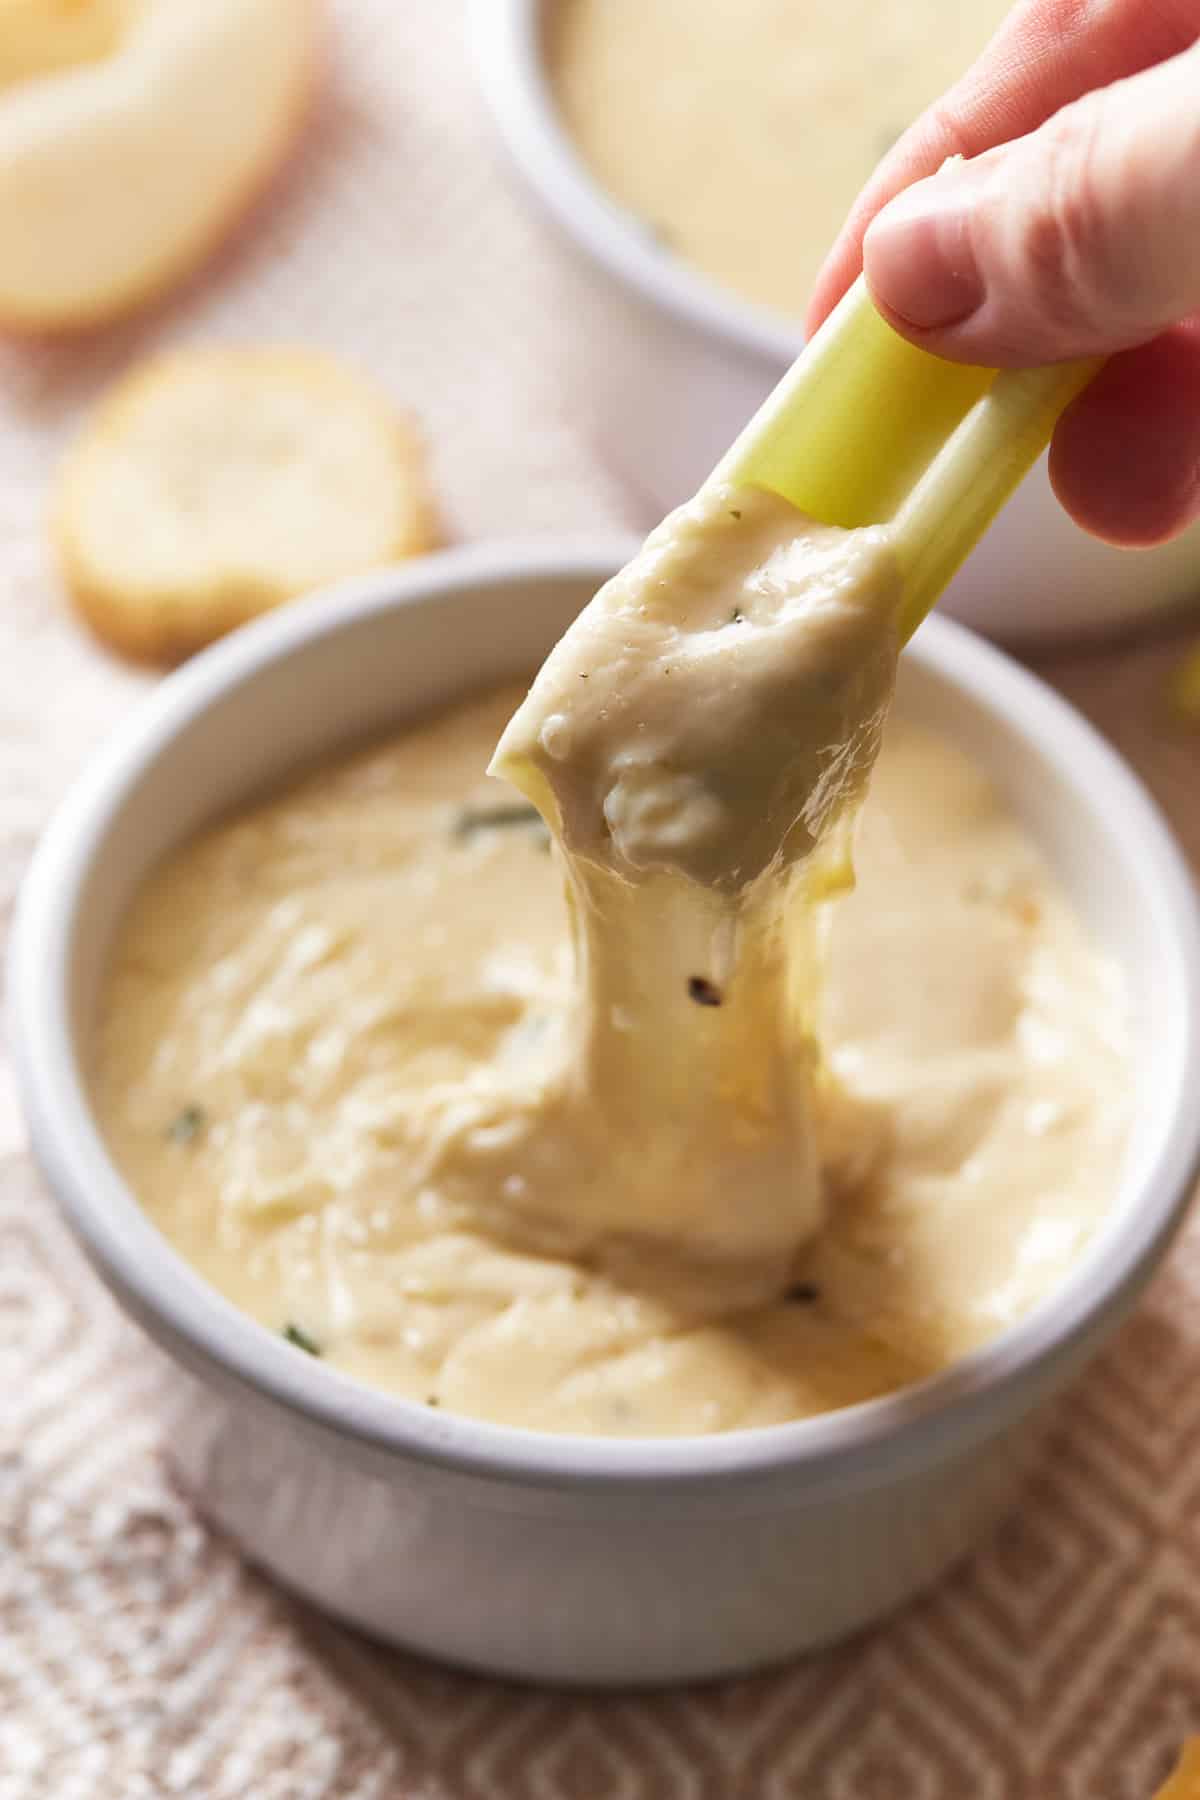 a hand pulling a piece of celery out of white wine fondue in a white bowl, creating a cheese pull.